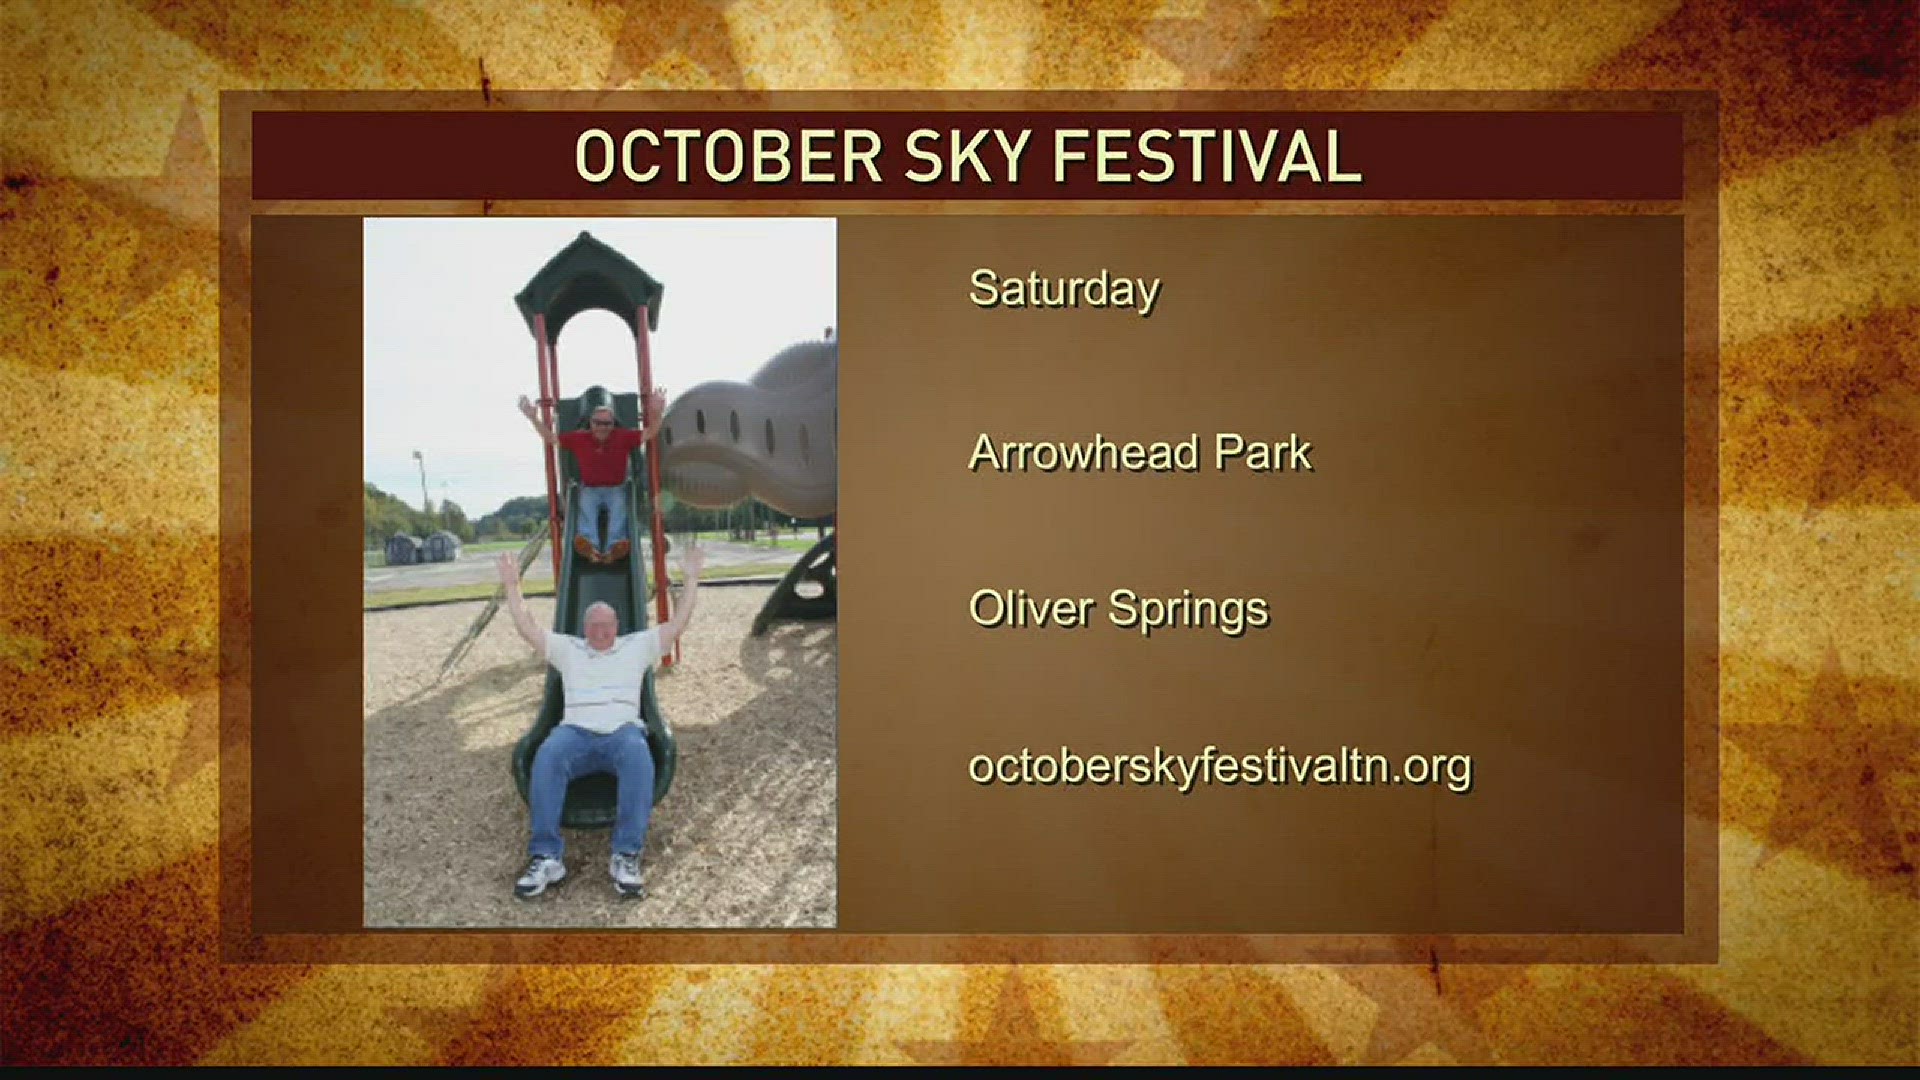 Oliver Springs will host the October Sky Festival 9 a.m. to 5 p.m. Saturday at Arrowhead Park.